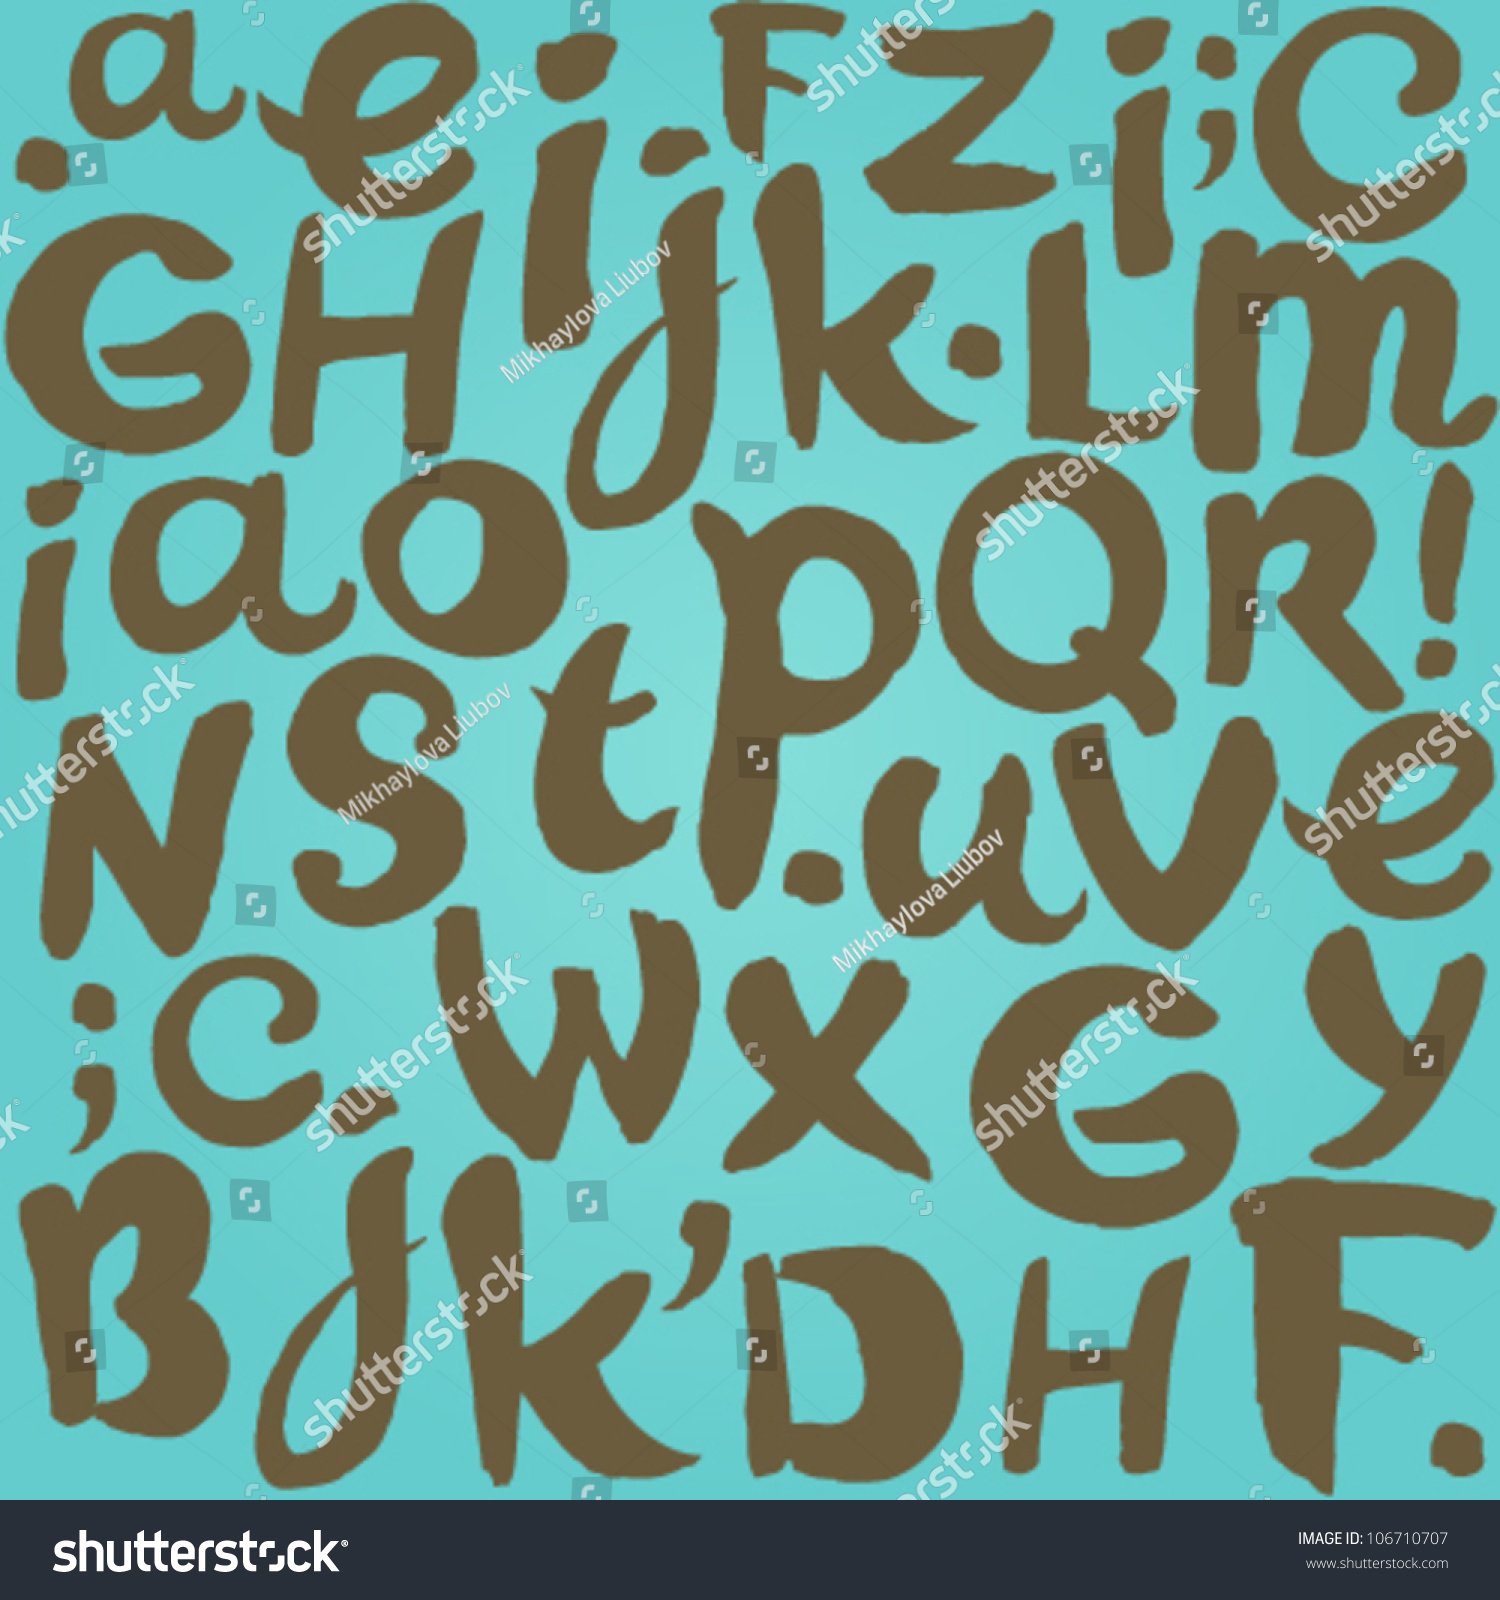 Turquoise Background Handwritten Grunge Letters Stock Vector 106710707 ...